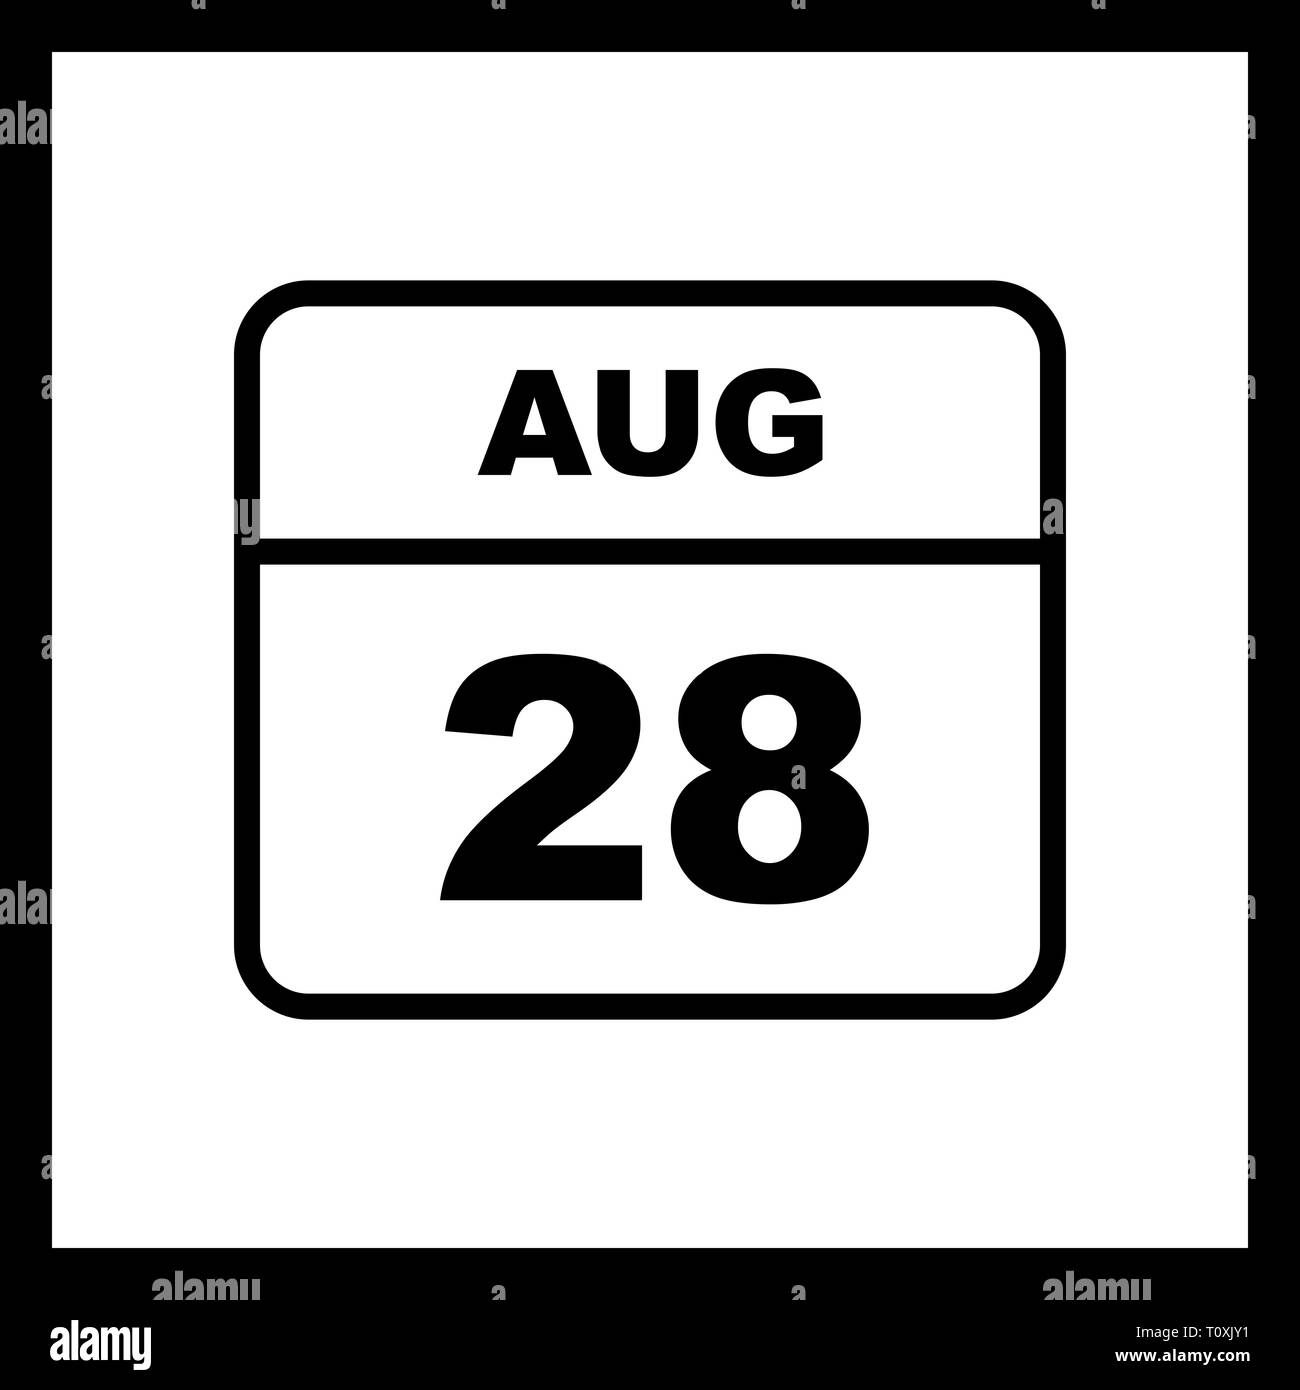 August 28th Date on a Single Day Calendar Stock Photo Alamy